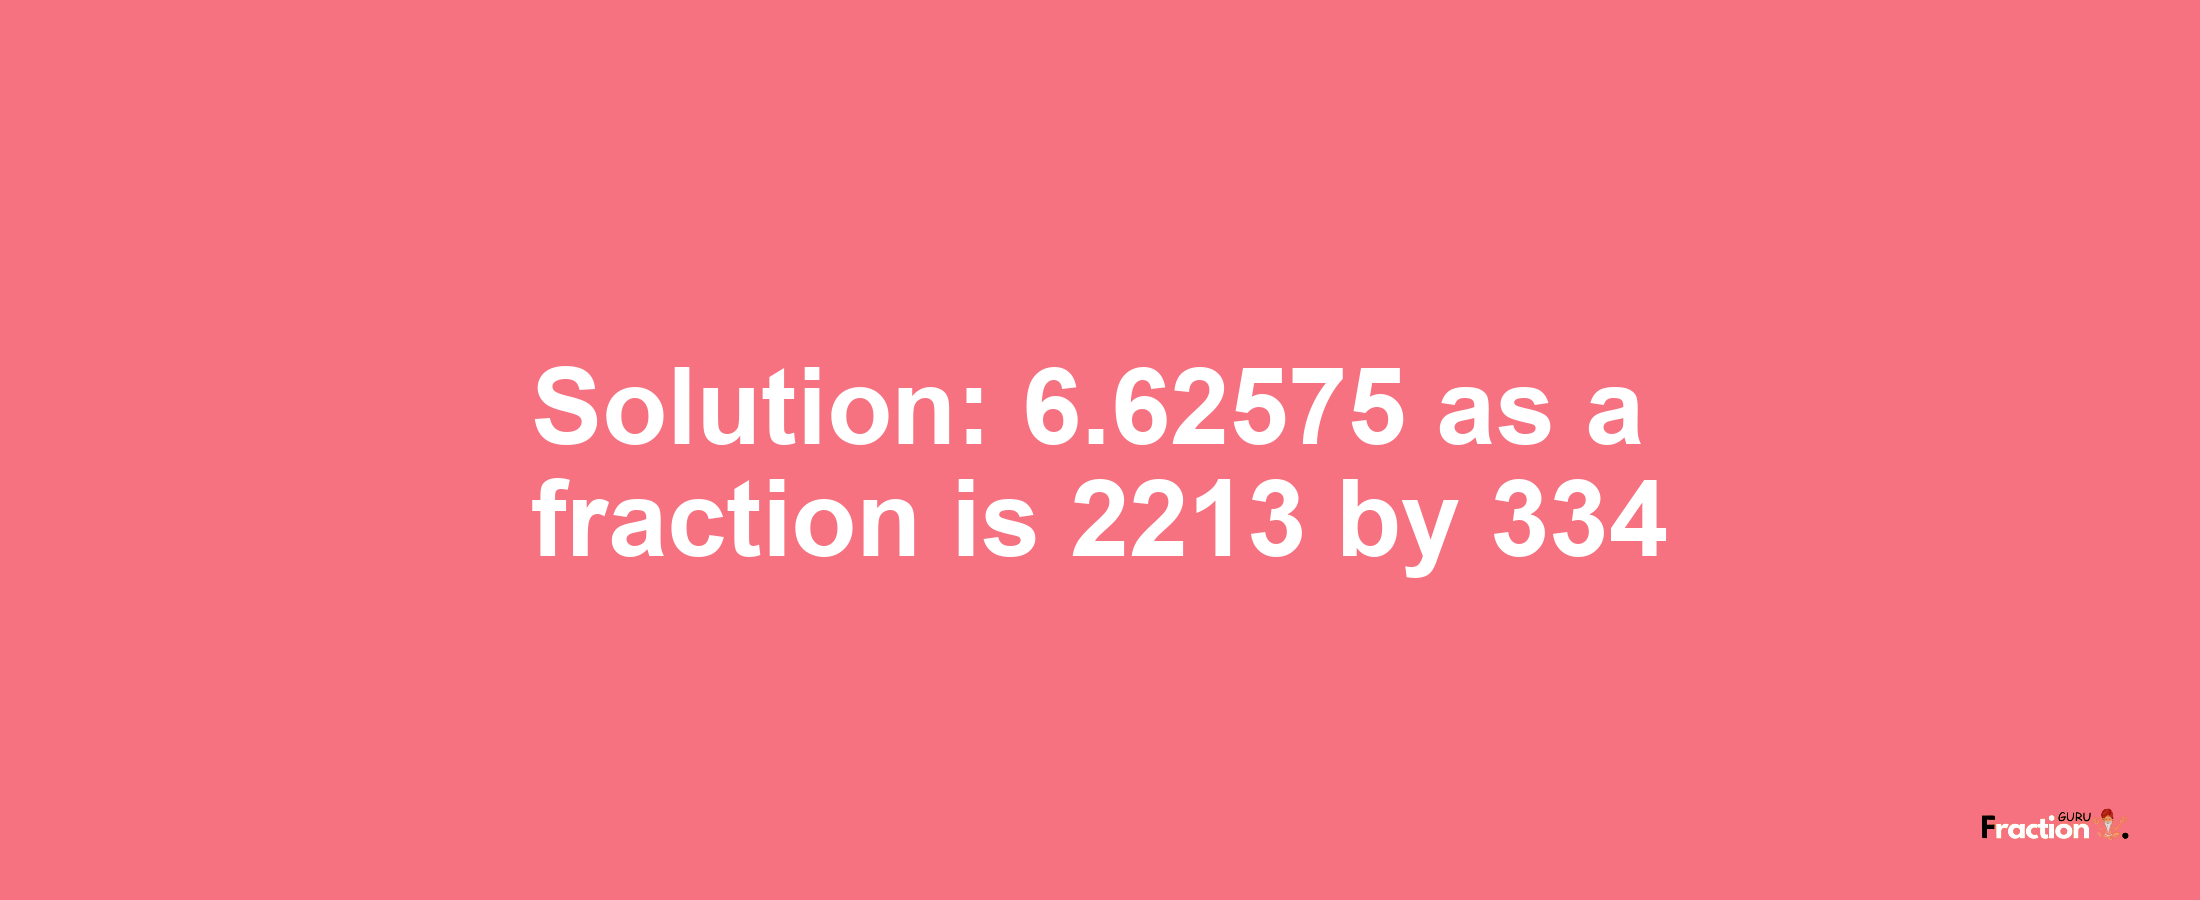 Solution:6.62575 as a fraction is 2213/334